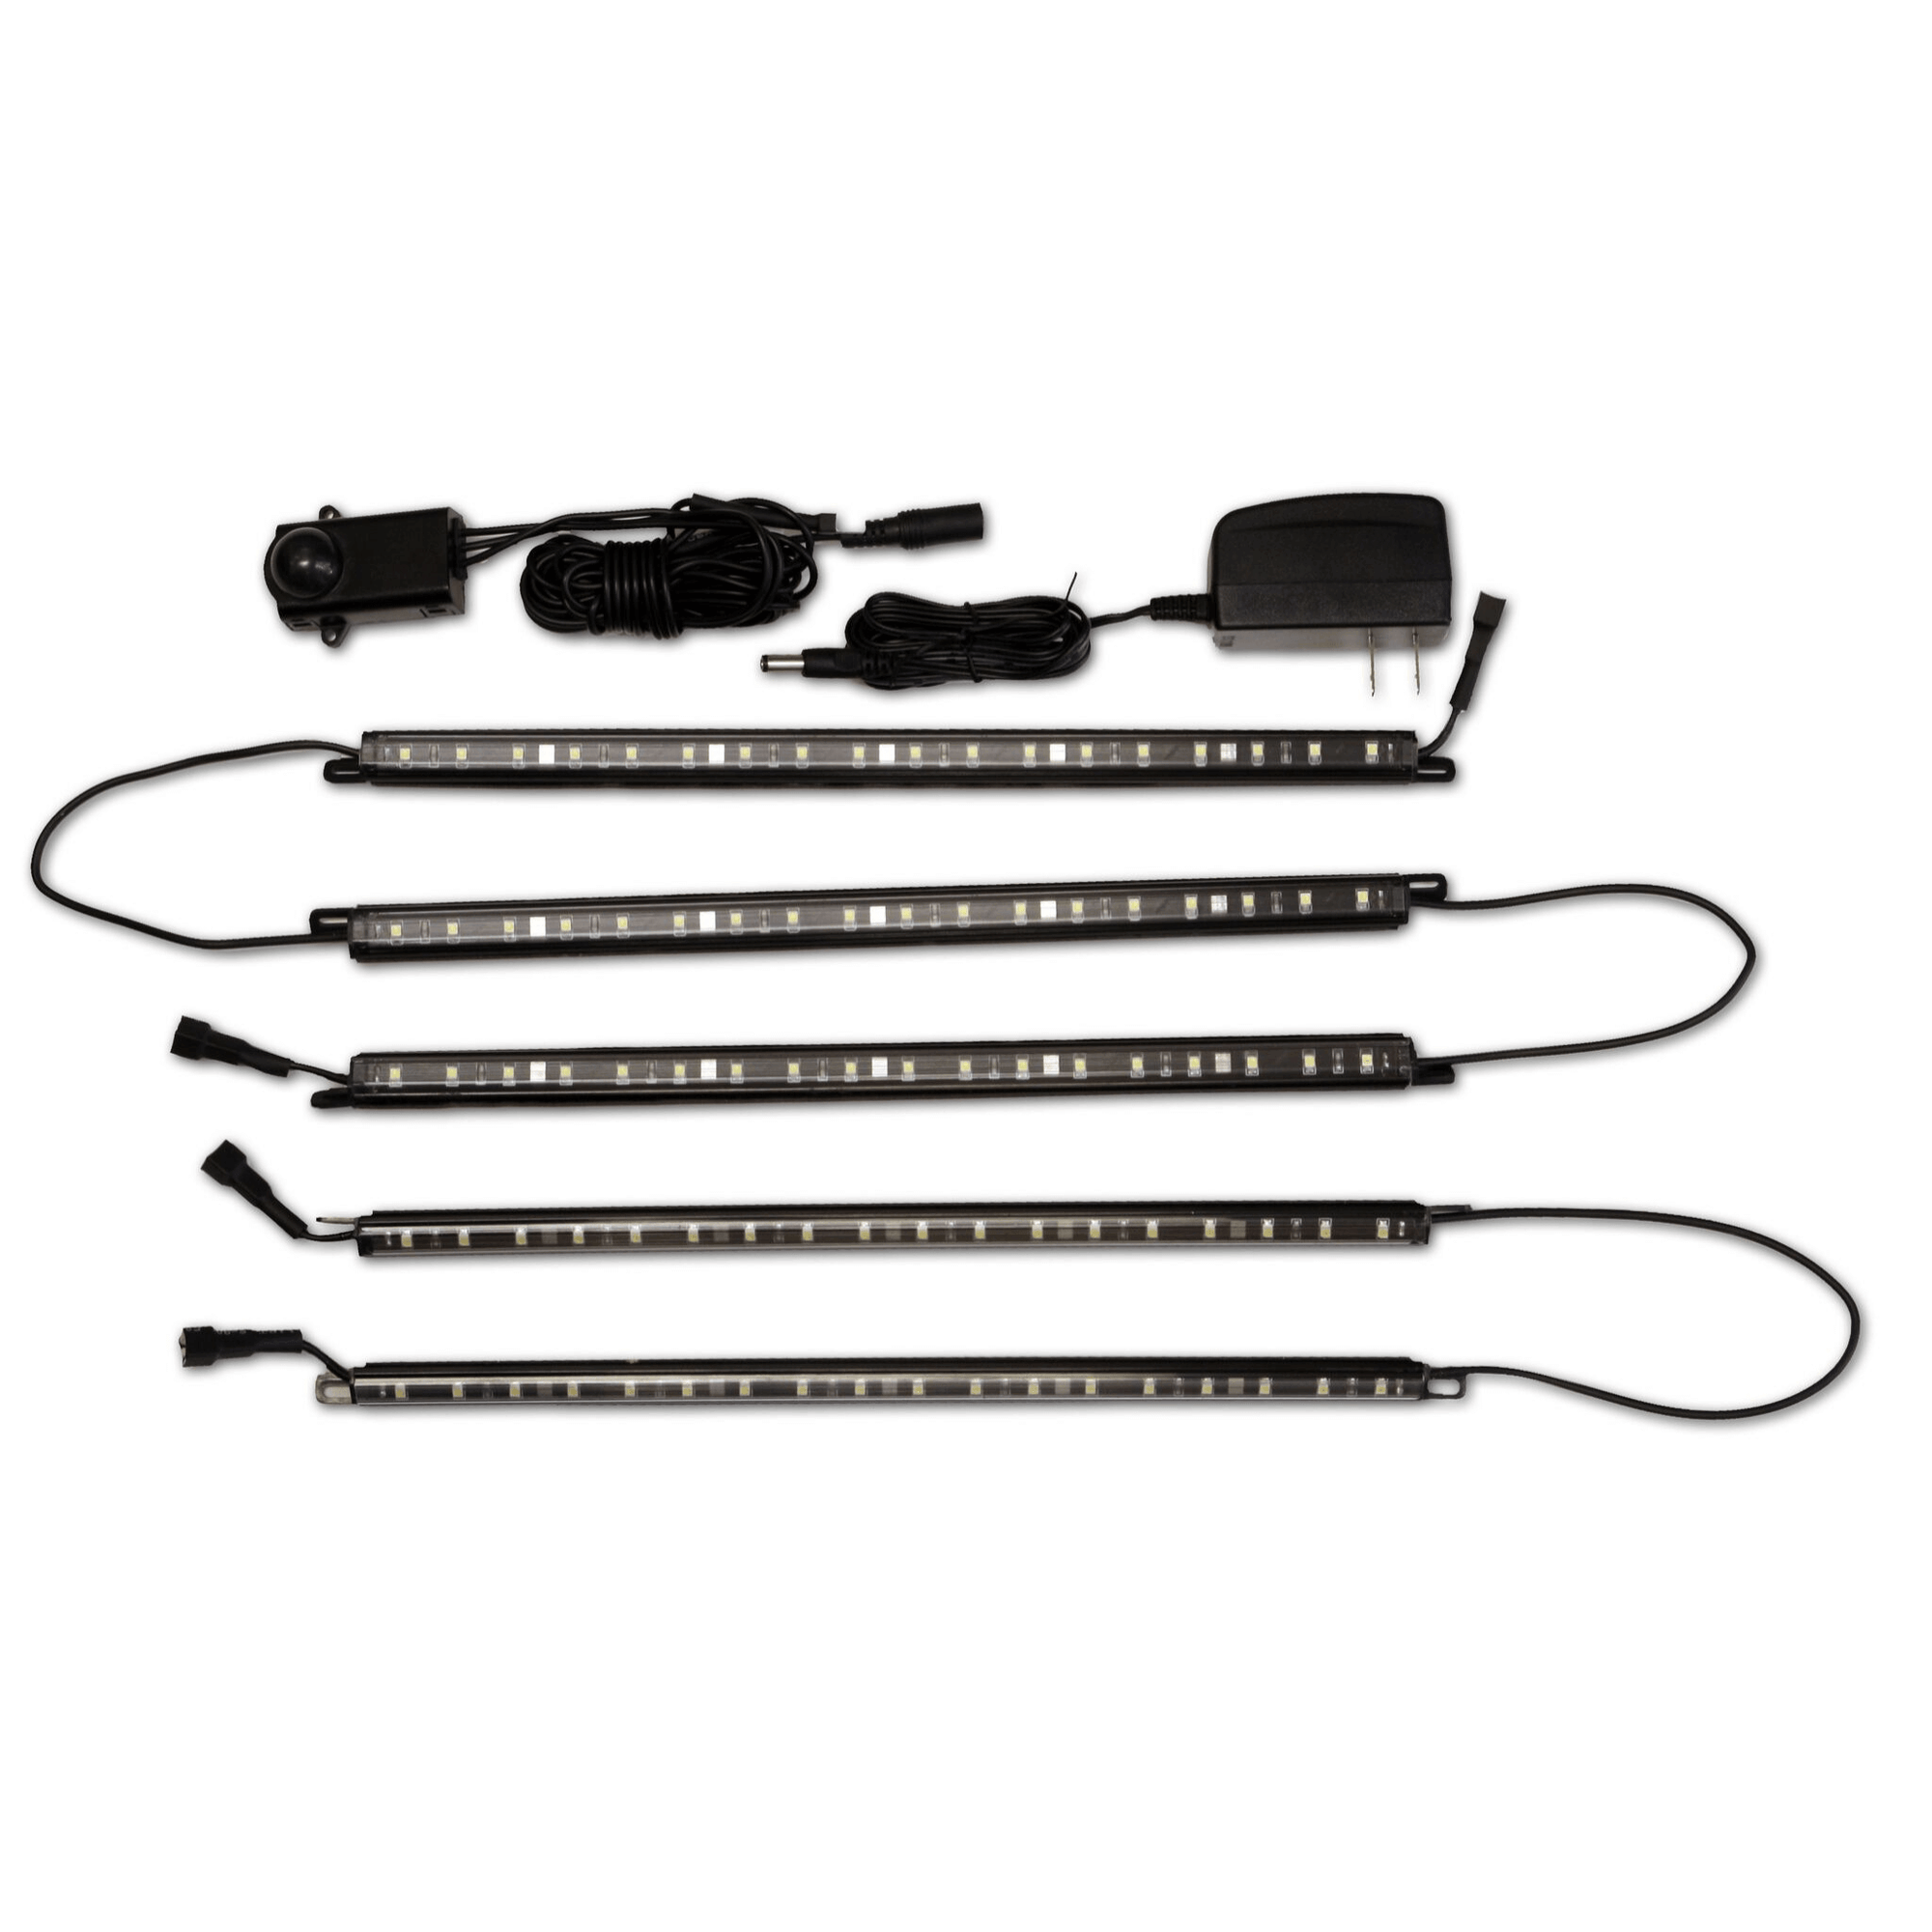 Accessory - Lights - Clearview Safe Light Kits | Liberty Safe Norcal.